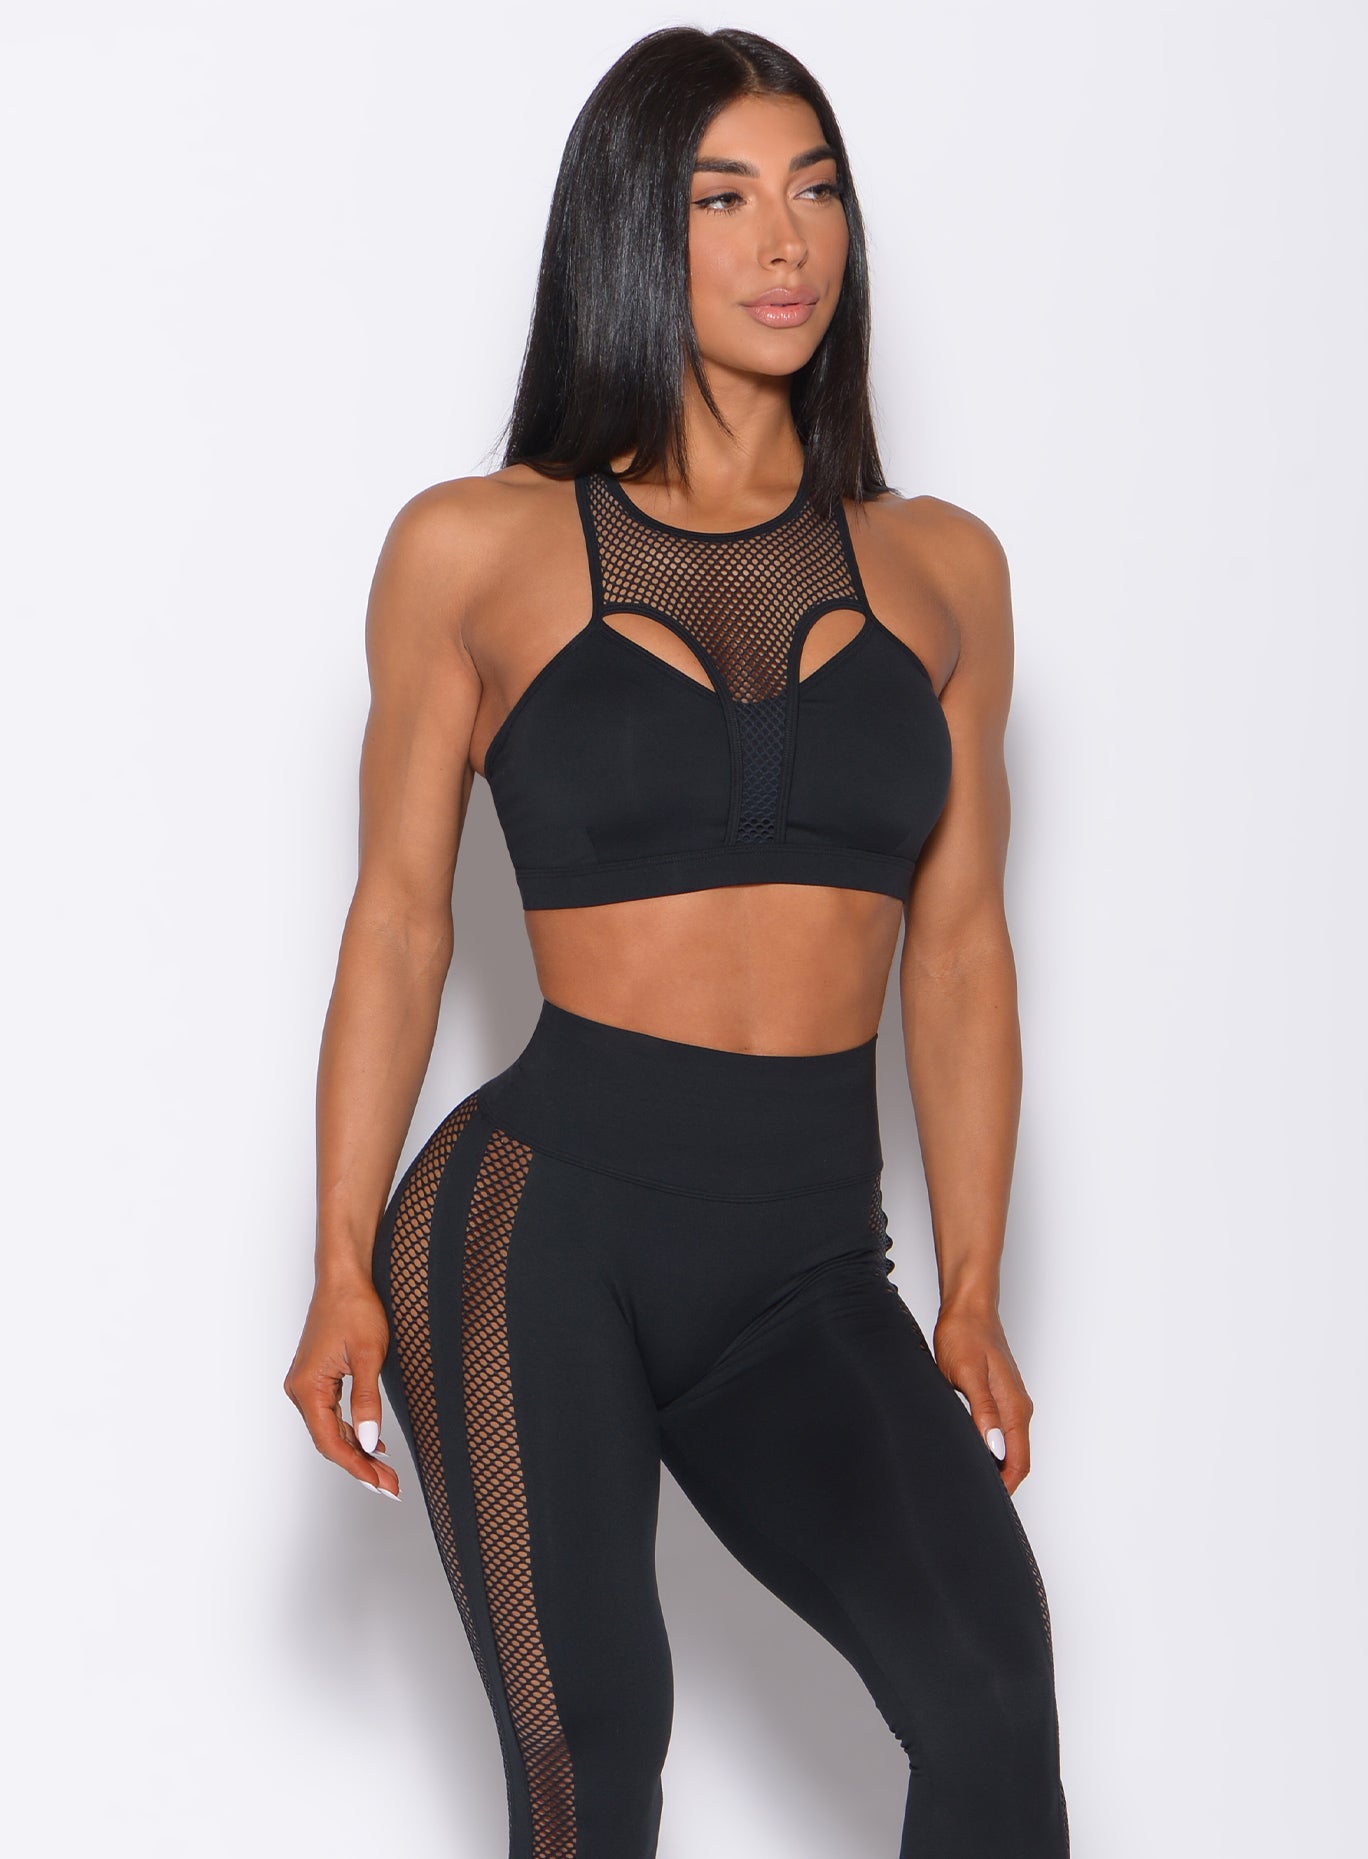 Front profile view of a model wearing our black Attitude Sports Bra and a matching mohawk leggings